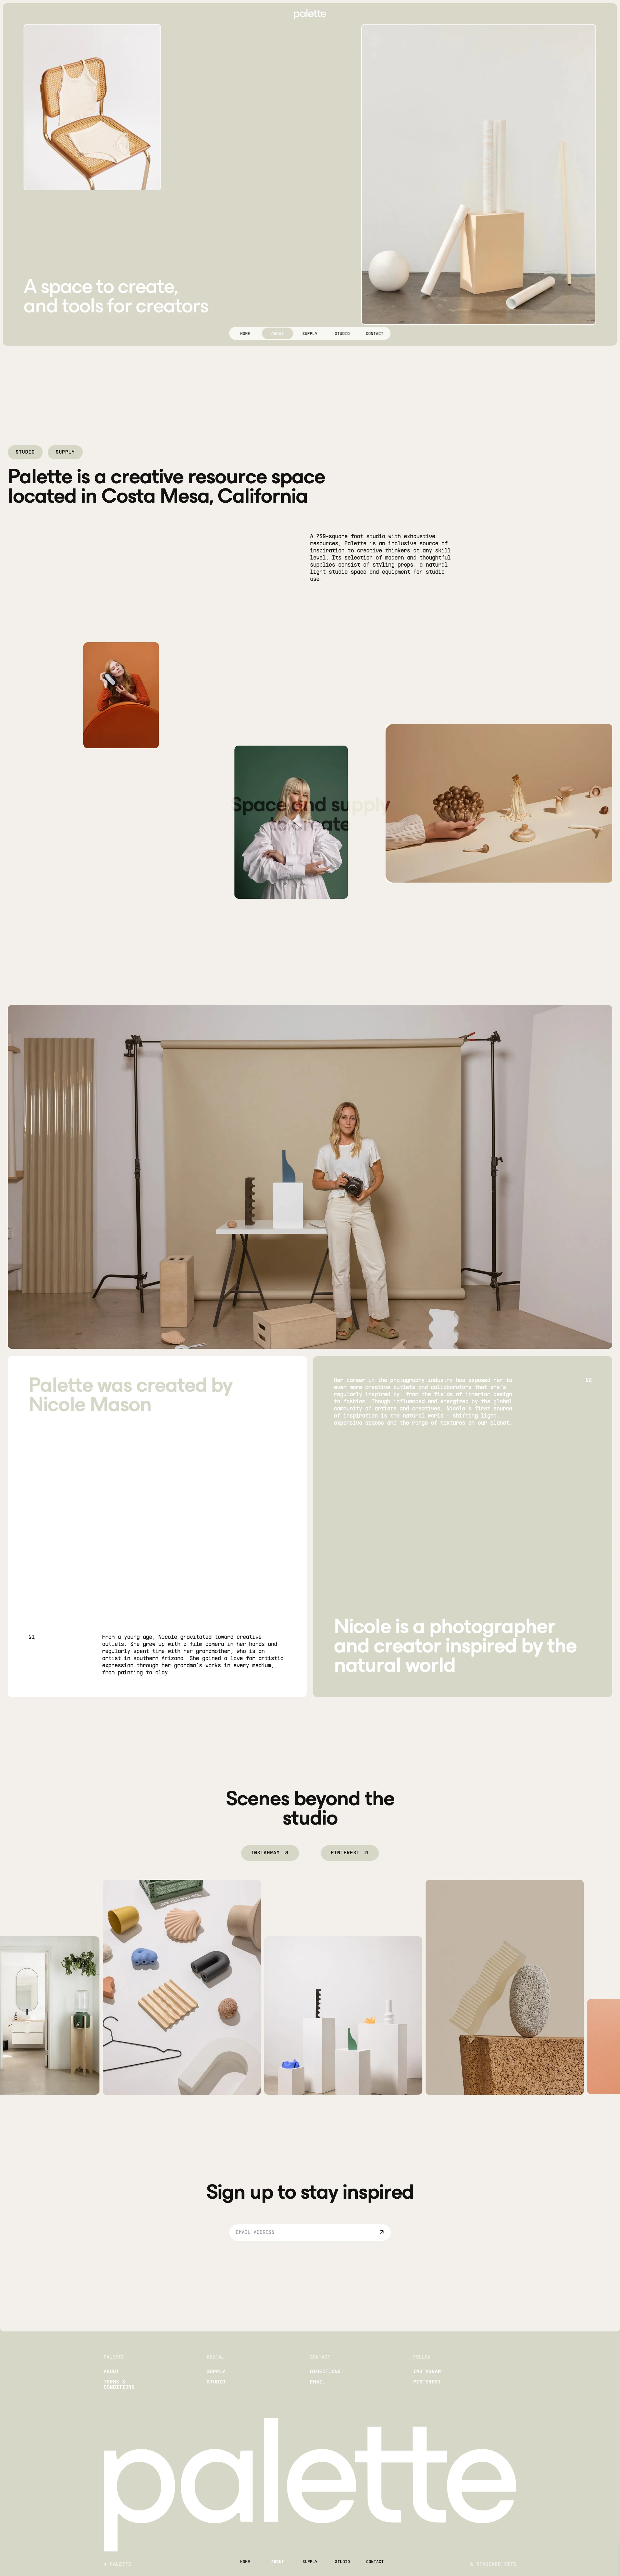 Palette Supply Landing Page Example: A comprehensive studio for contemplation, education and experimentation, Palette offers both space and supply for limitless creativity.